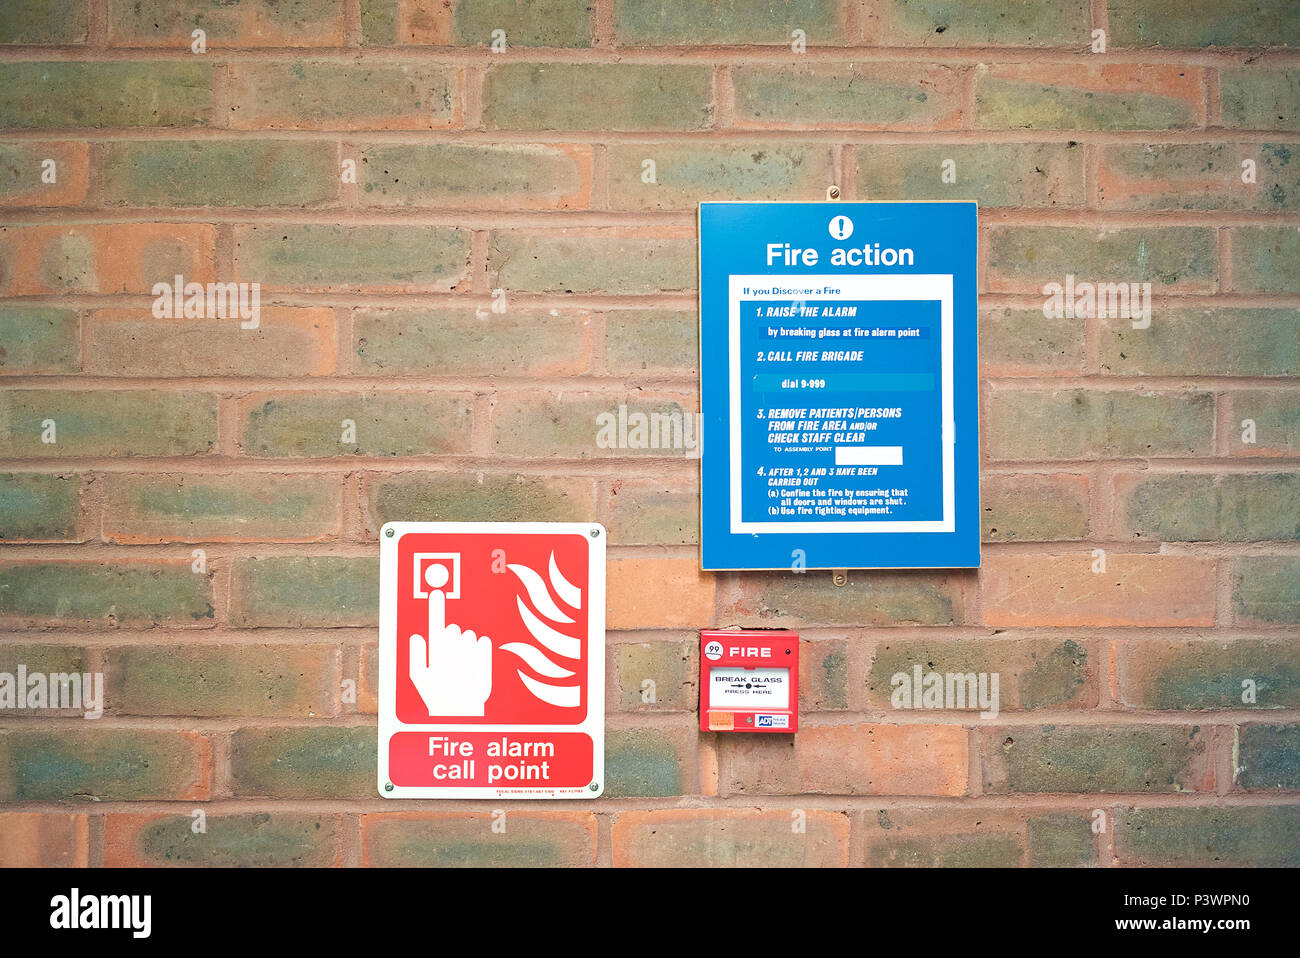 Fire Alarm Call Point to be used in the event of discovering a fire. Stock Photo